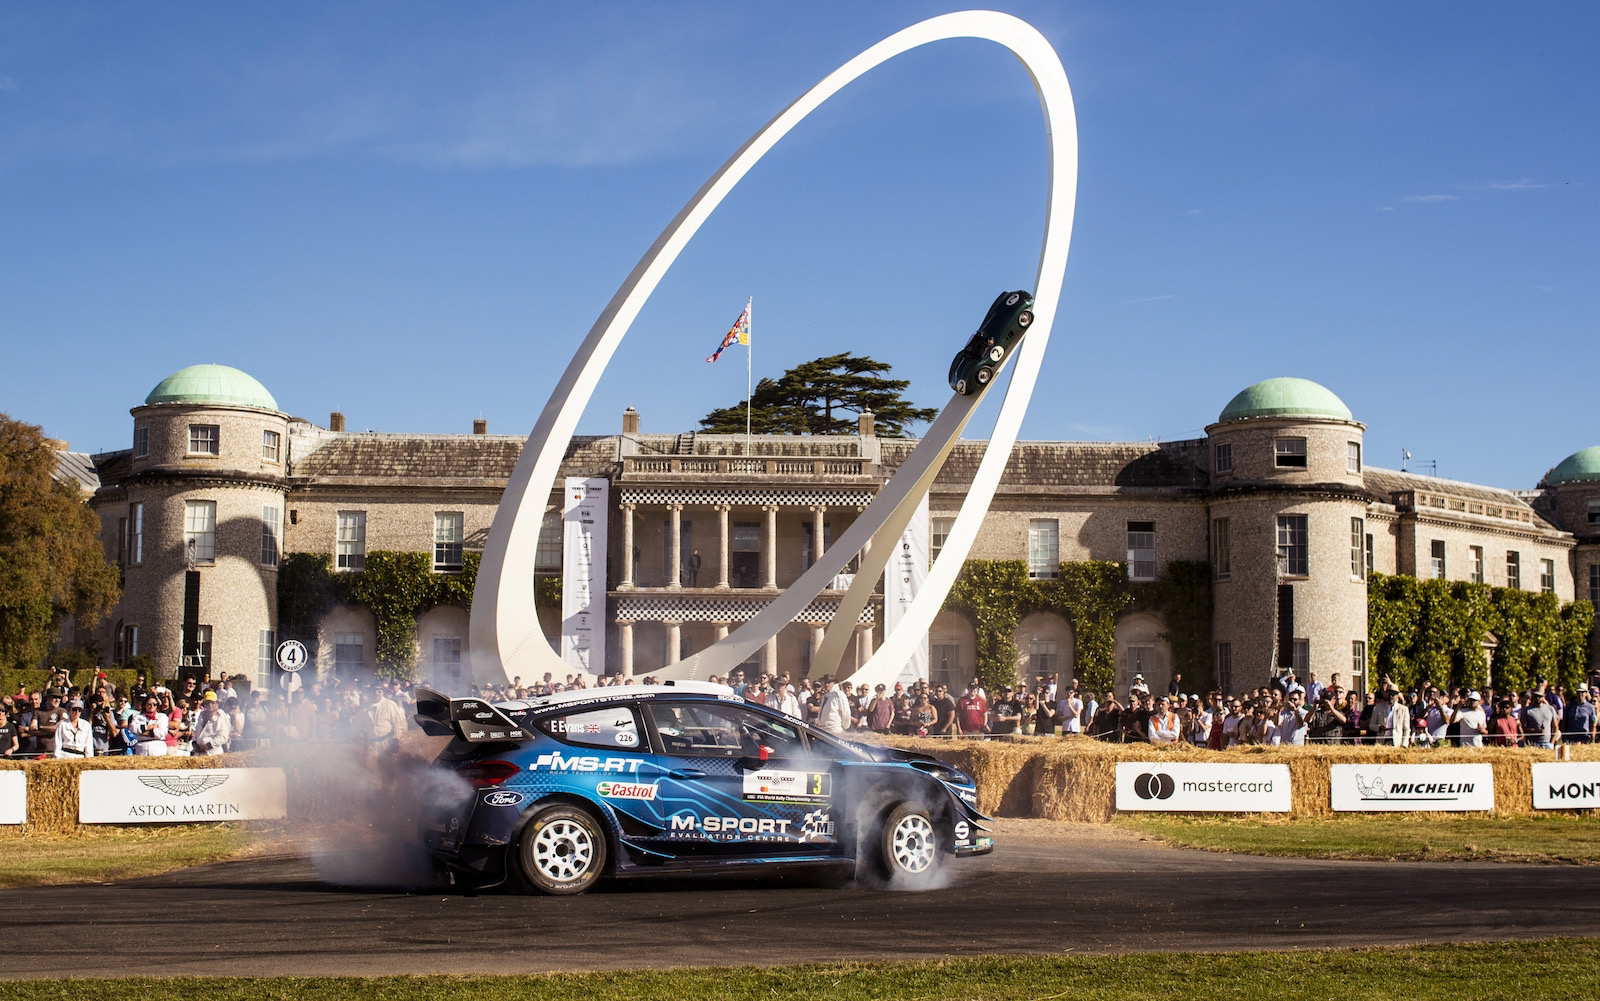 2021 Goodwood Festival of Speed going ahead, under ‘pilot event’ guidelines